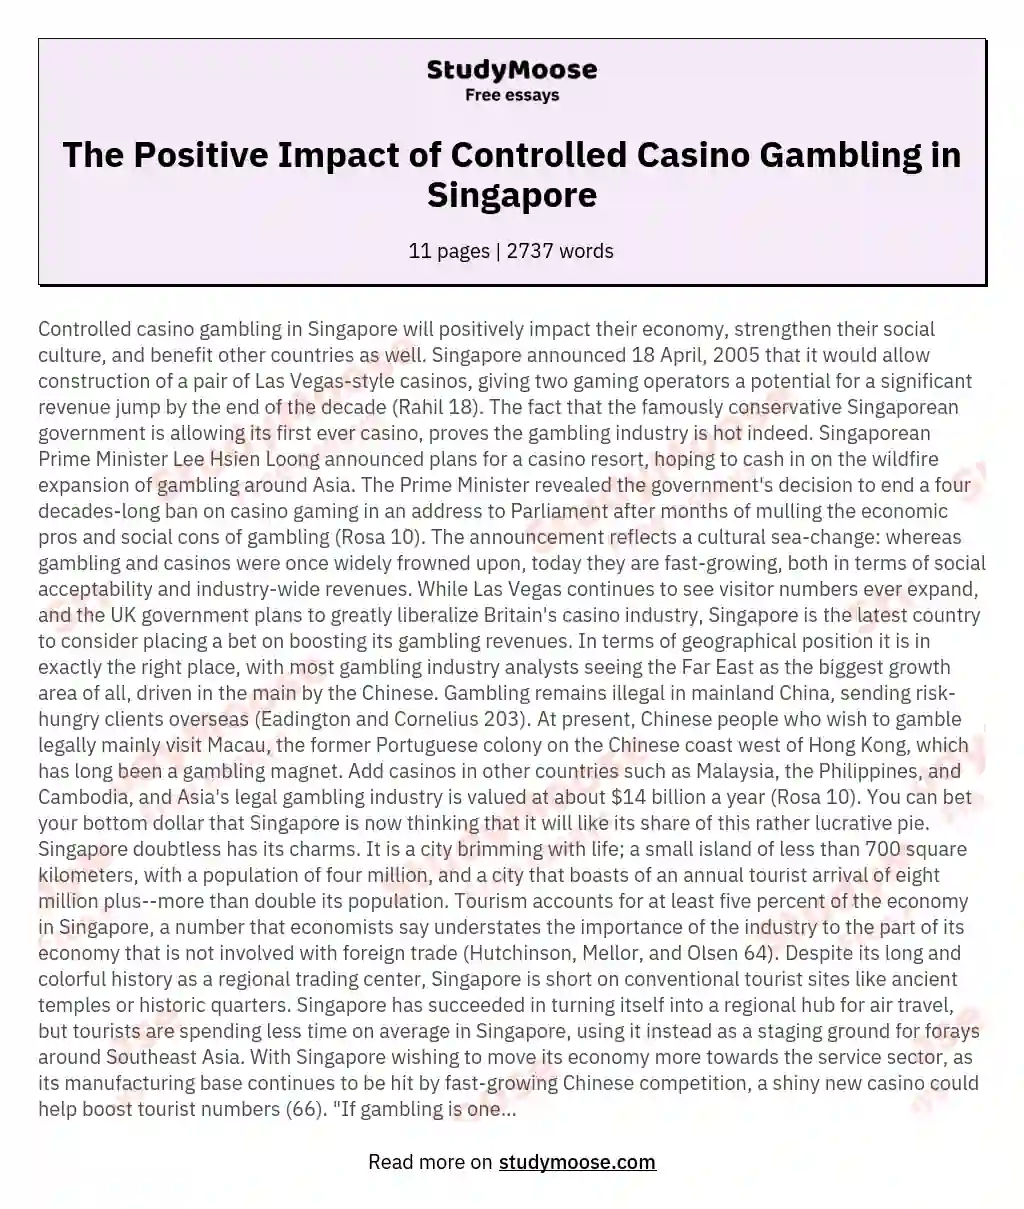 The Positive Impact of Controlled Casino Gambling in Singapore